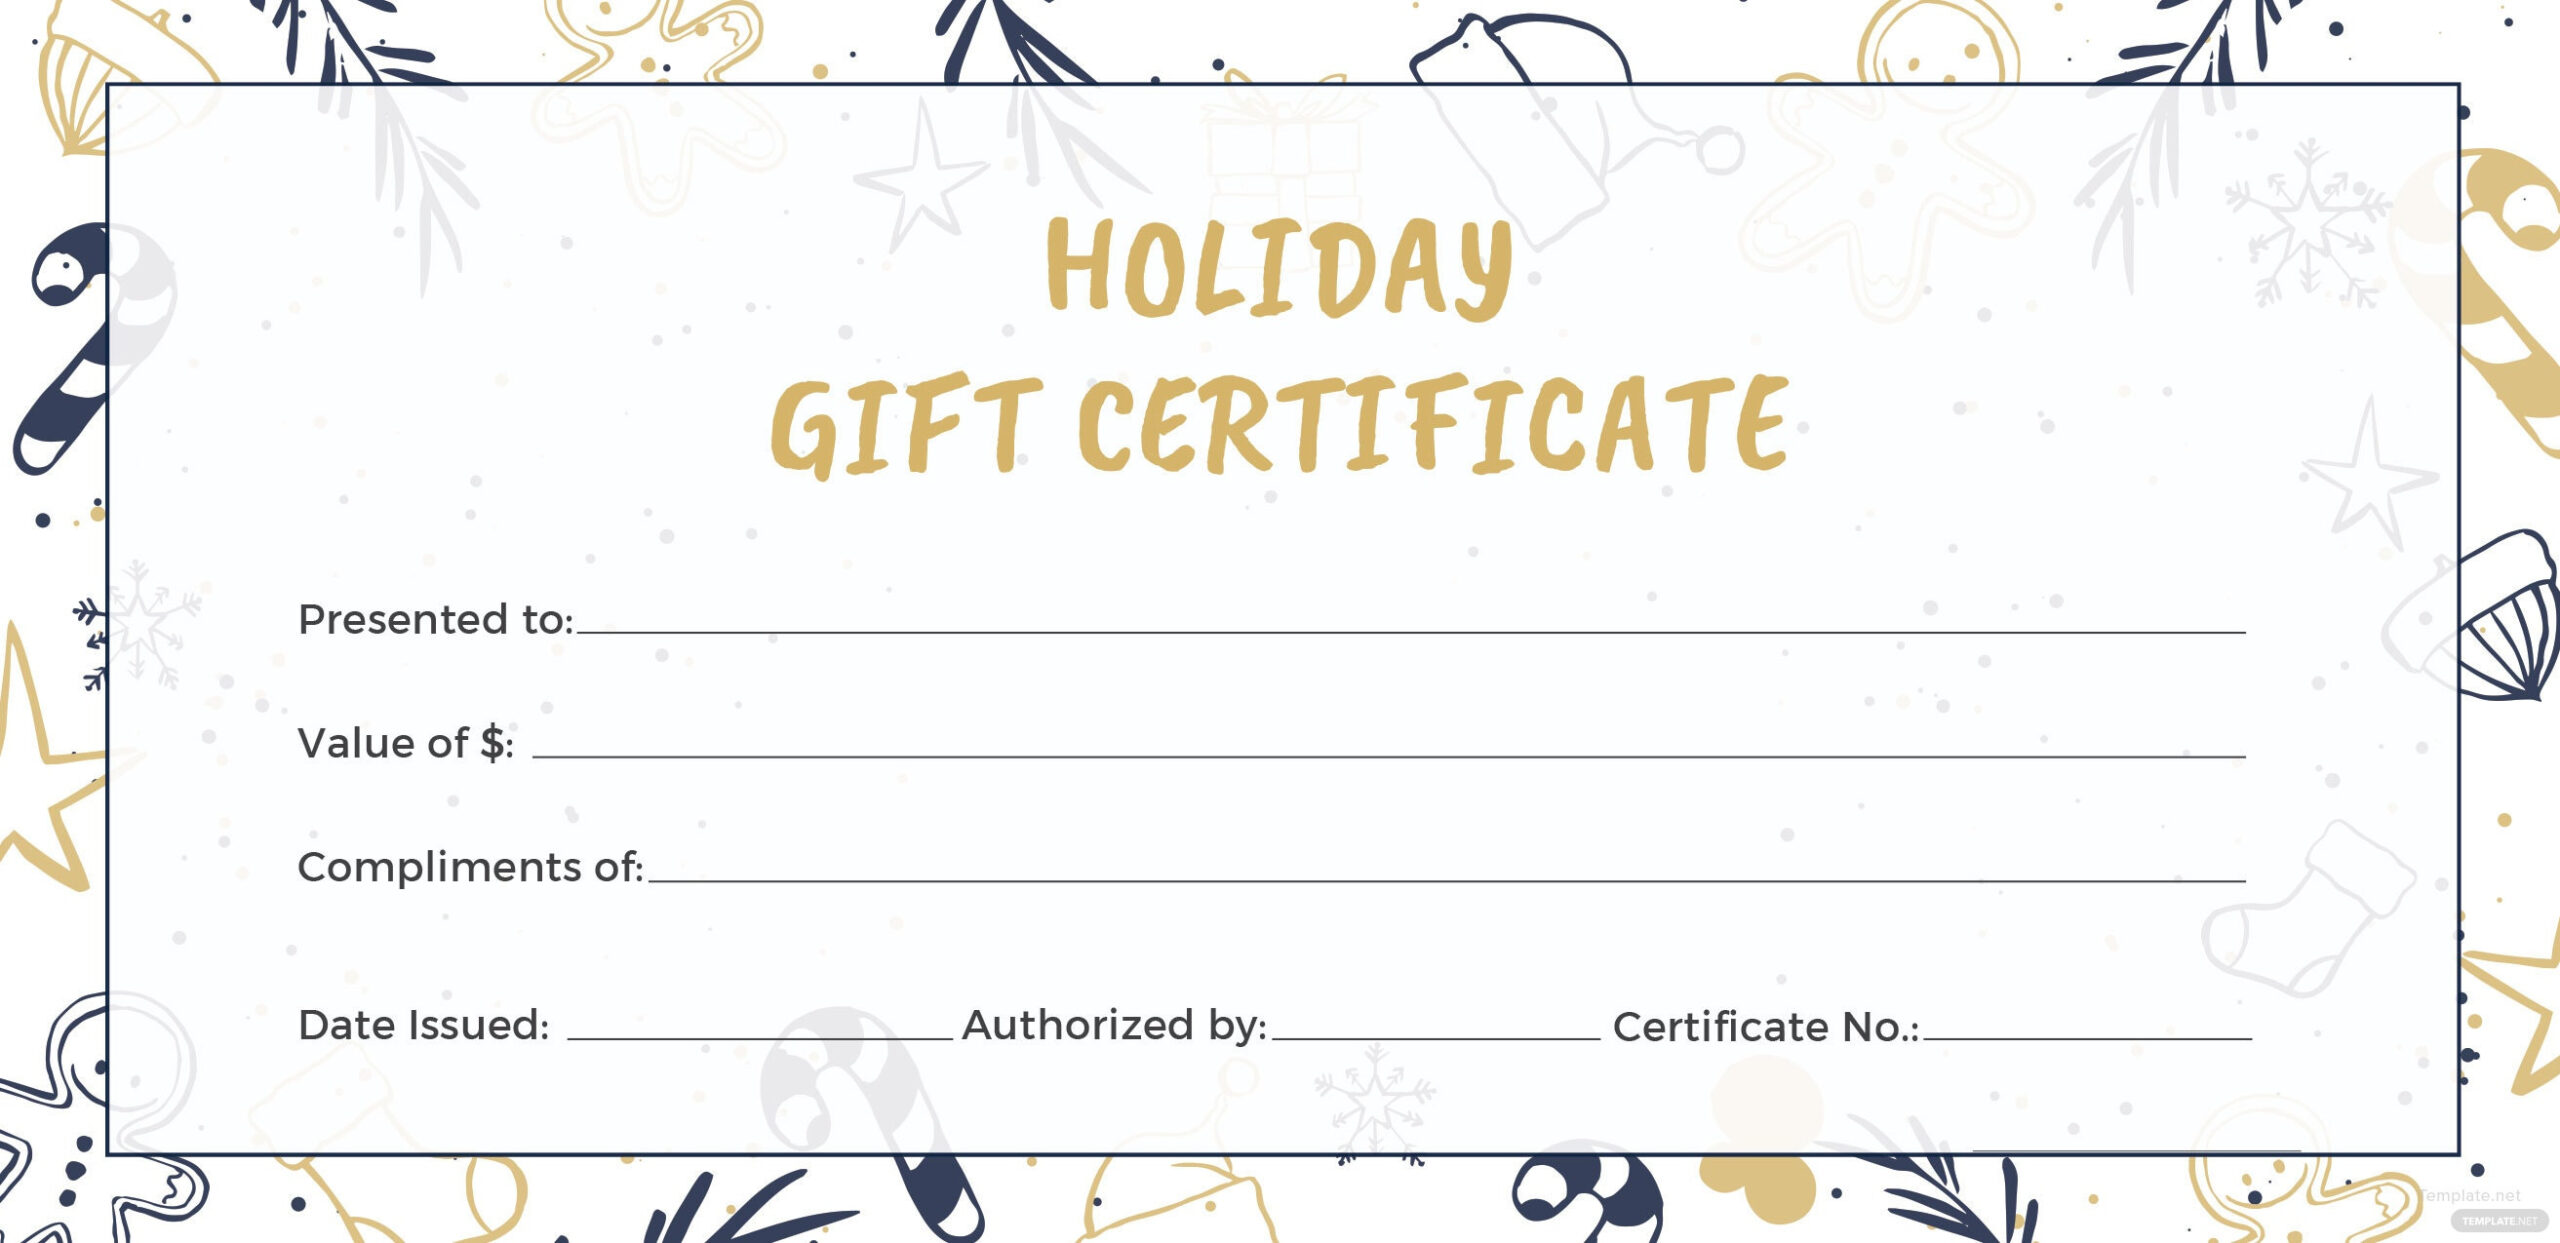 Free Holiday Gift Certificate Template In Adobe Illustrator, Microsoft throughout Publisher Gift Certificate Template